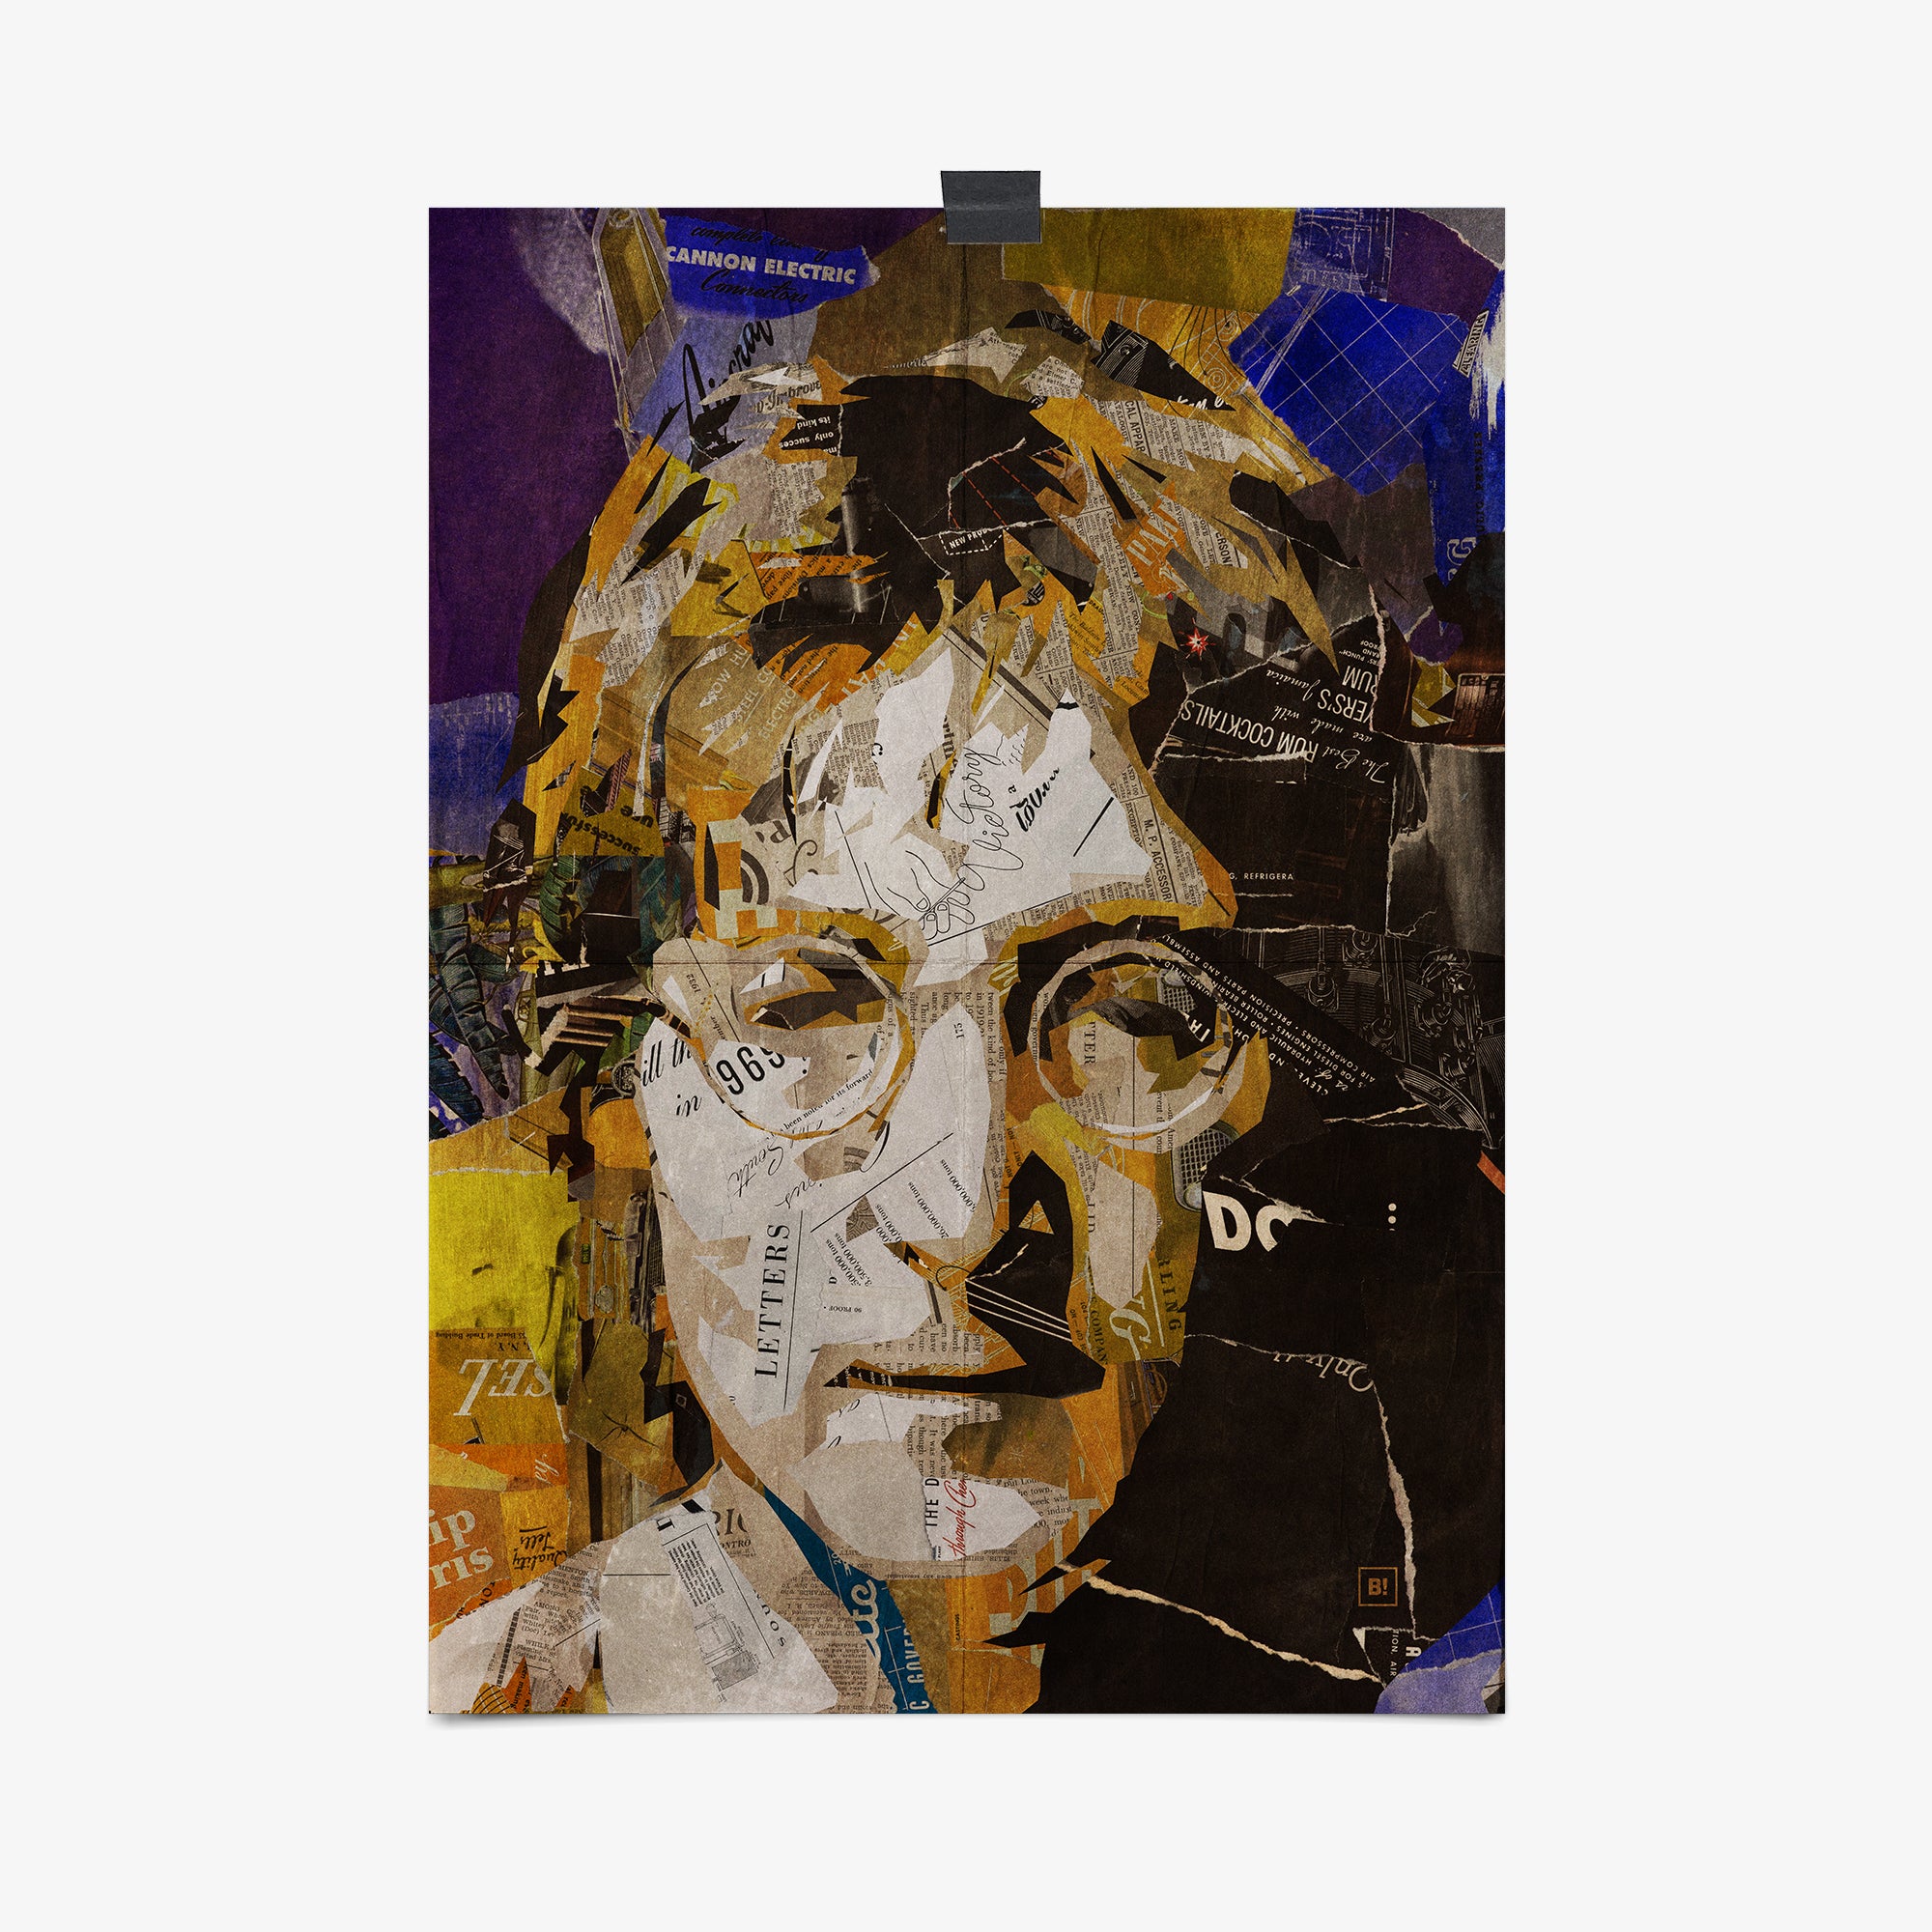 Be inspired by our iconic collage portrait art print of John Lennon. This artwork was printed using the giclée process on archival acid-free paper, capturing its timeless beauty in every detail.